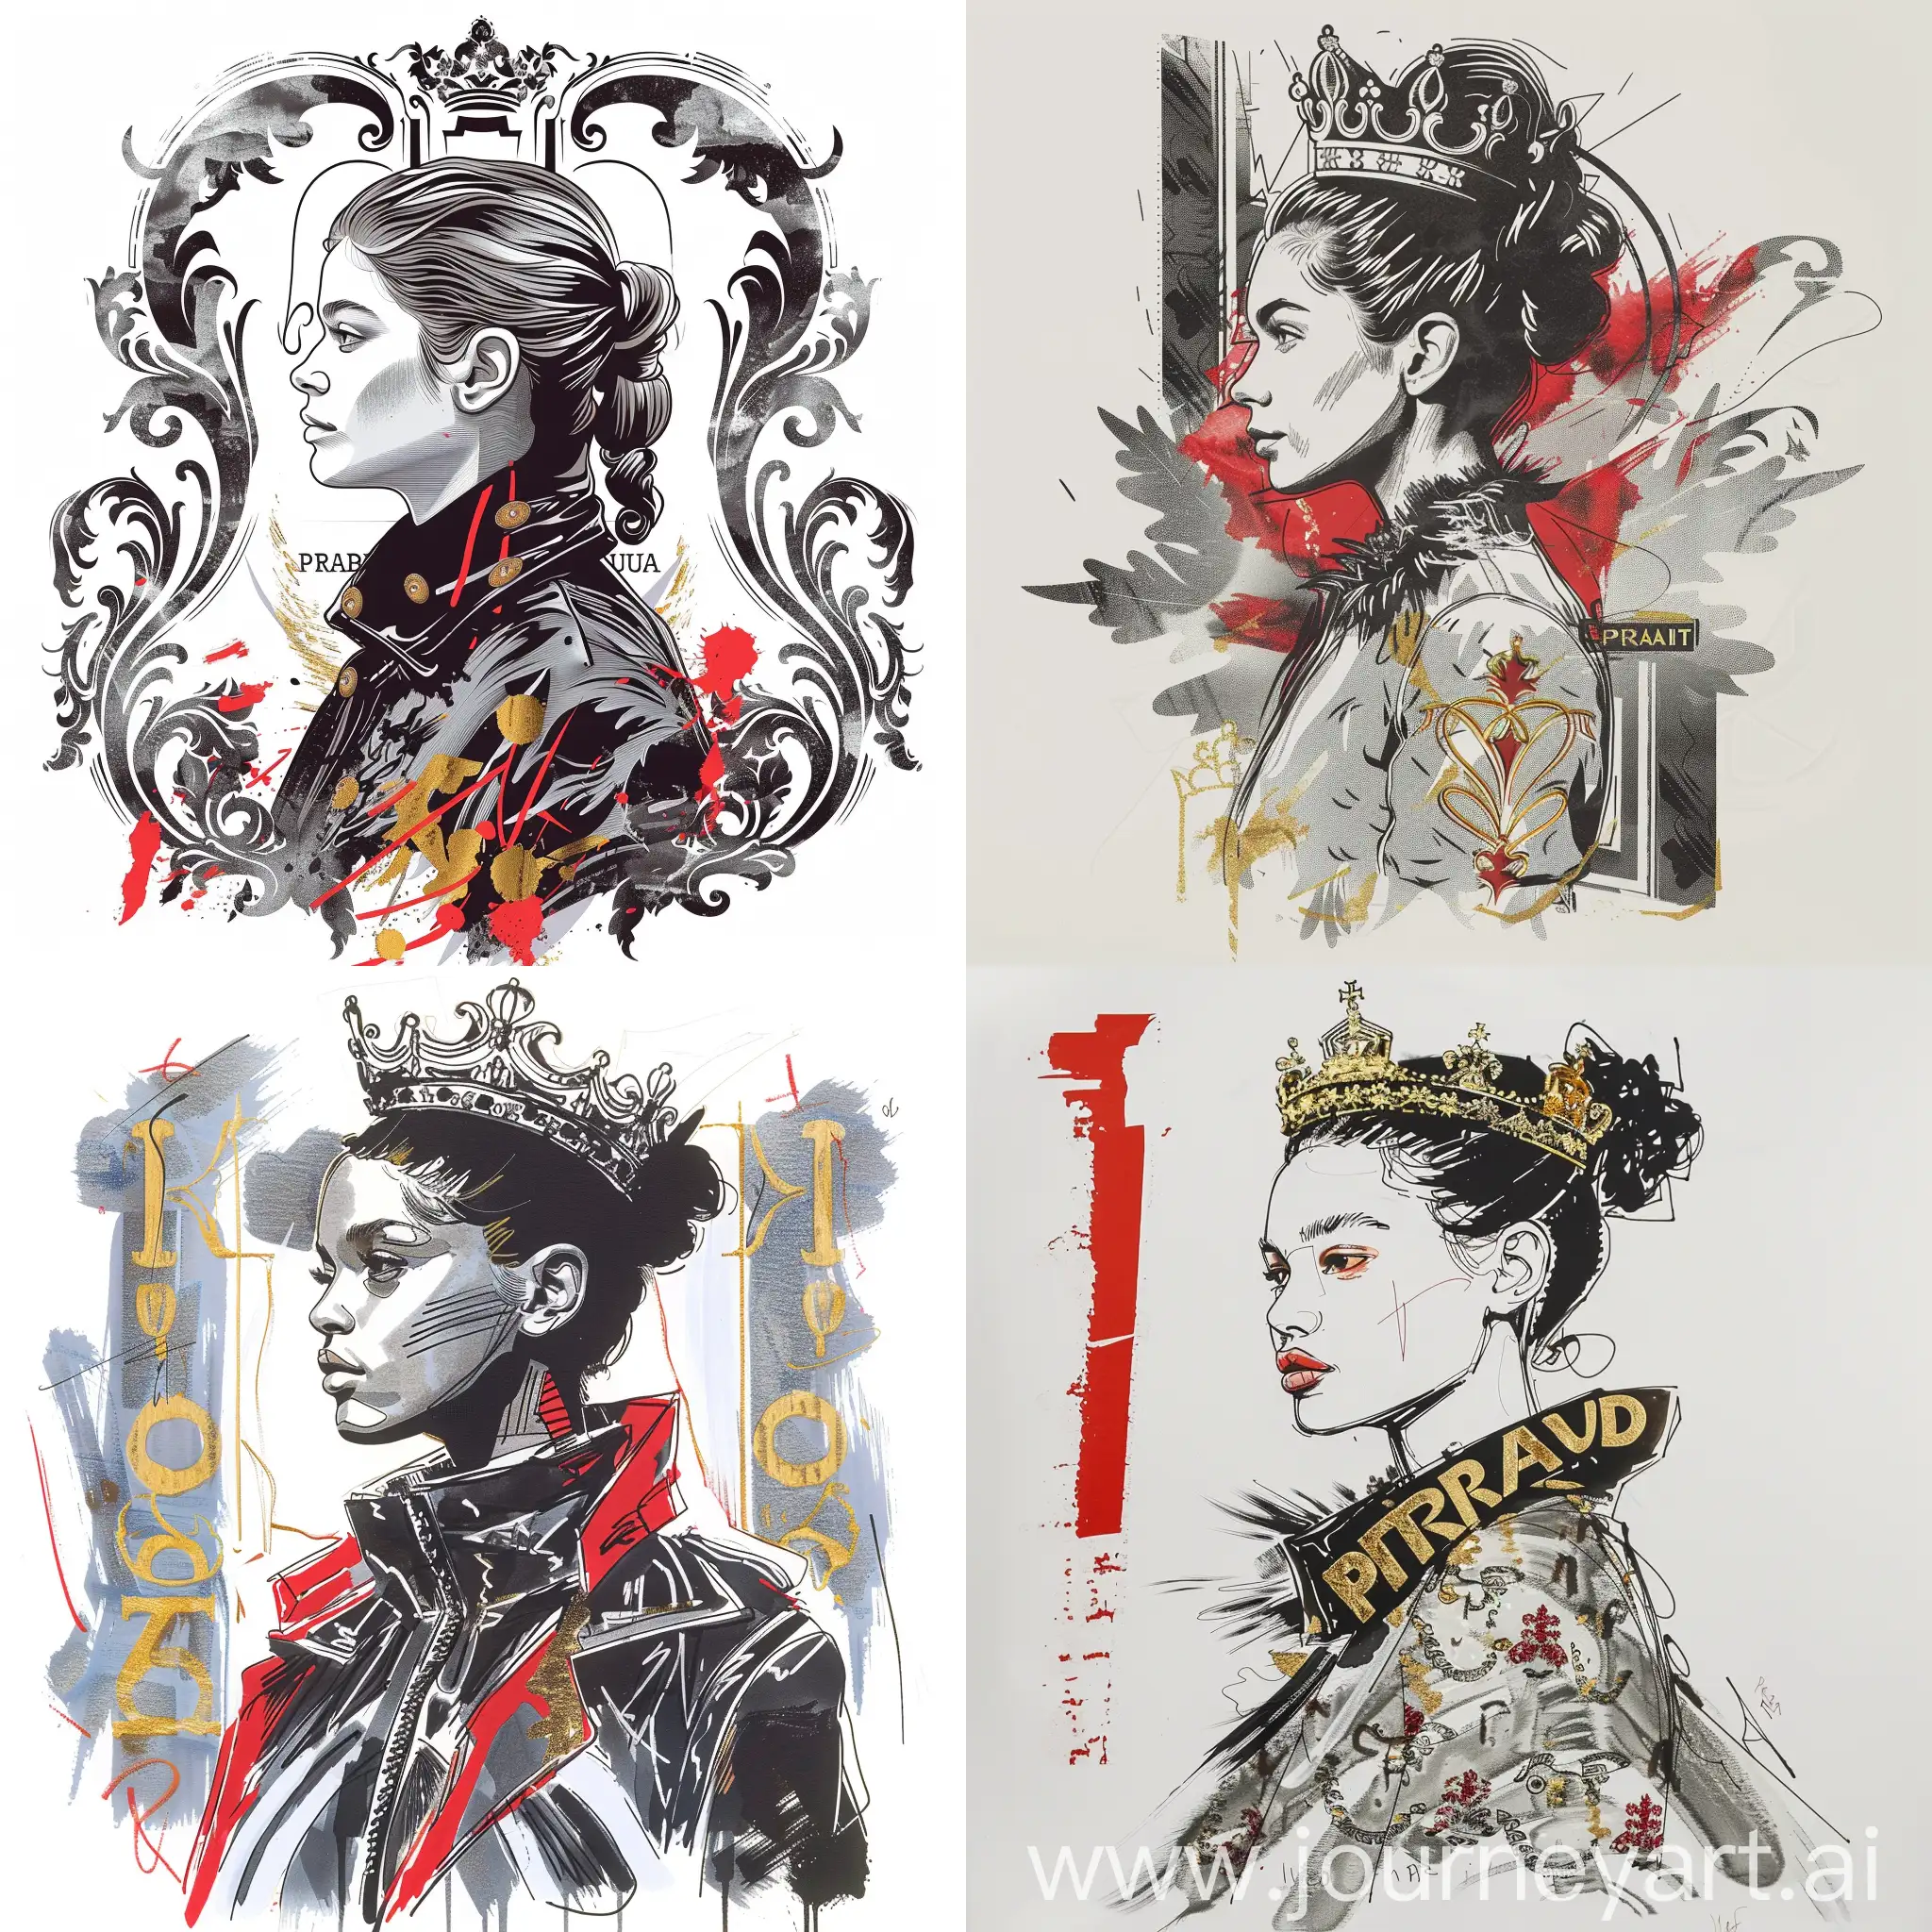 Young Queen looking like Miucci Prada, Prada clothes, central portrait in profile, on white background, colors: gray, black, red, gold, René Gruot style, decorative, illustration, ink stroke, caricature
